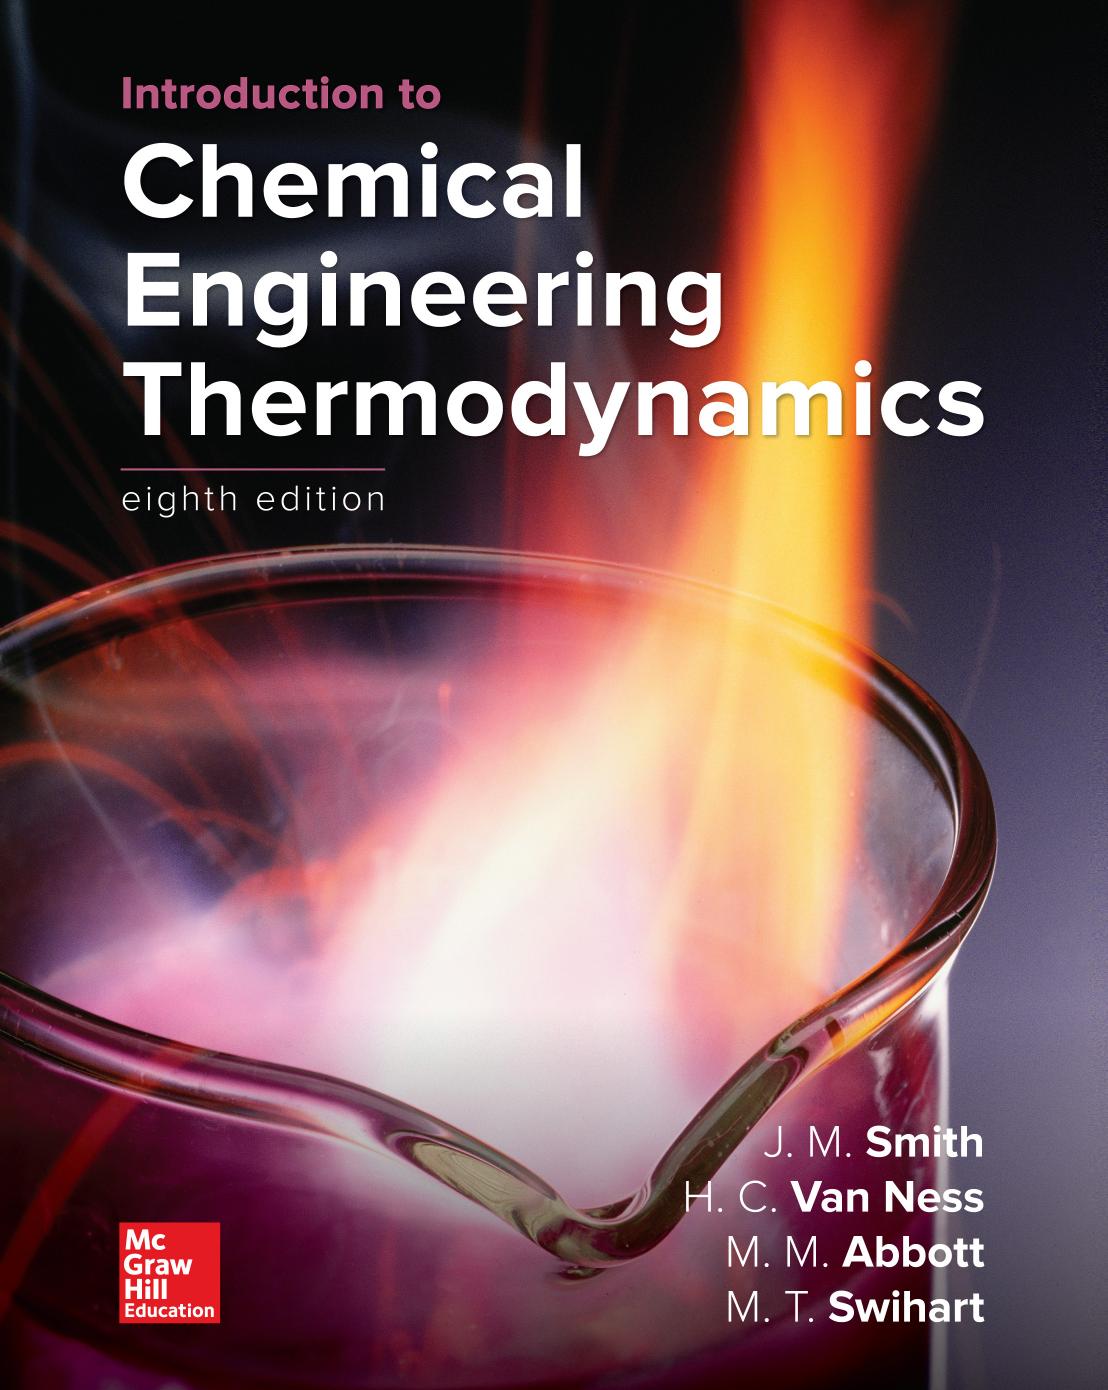 (Solution Manual)Introduction to Chemical Engineering Thermodynamics 8th Edition.zipTextbooks